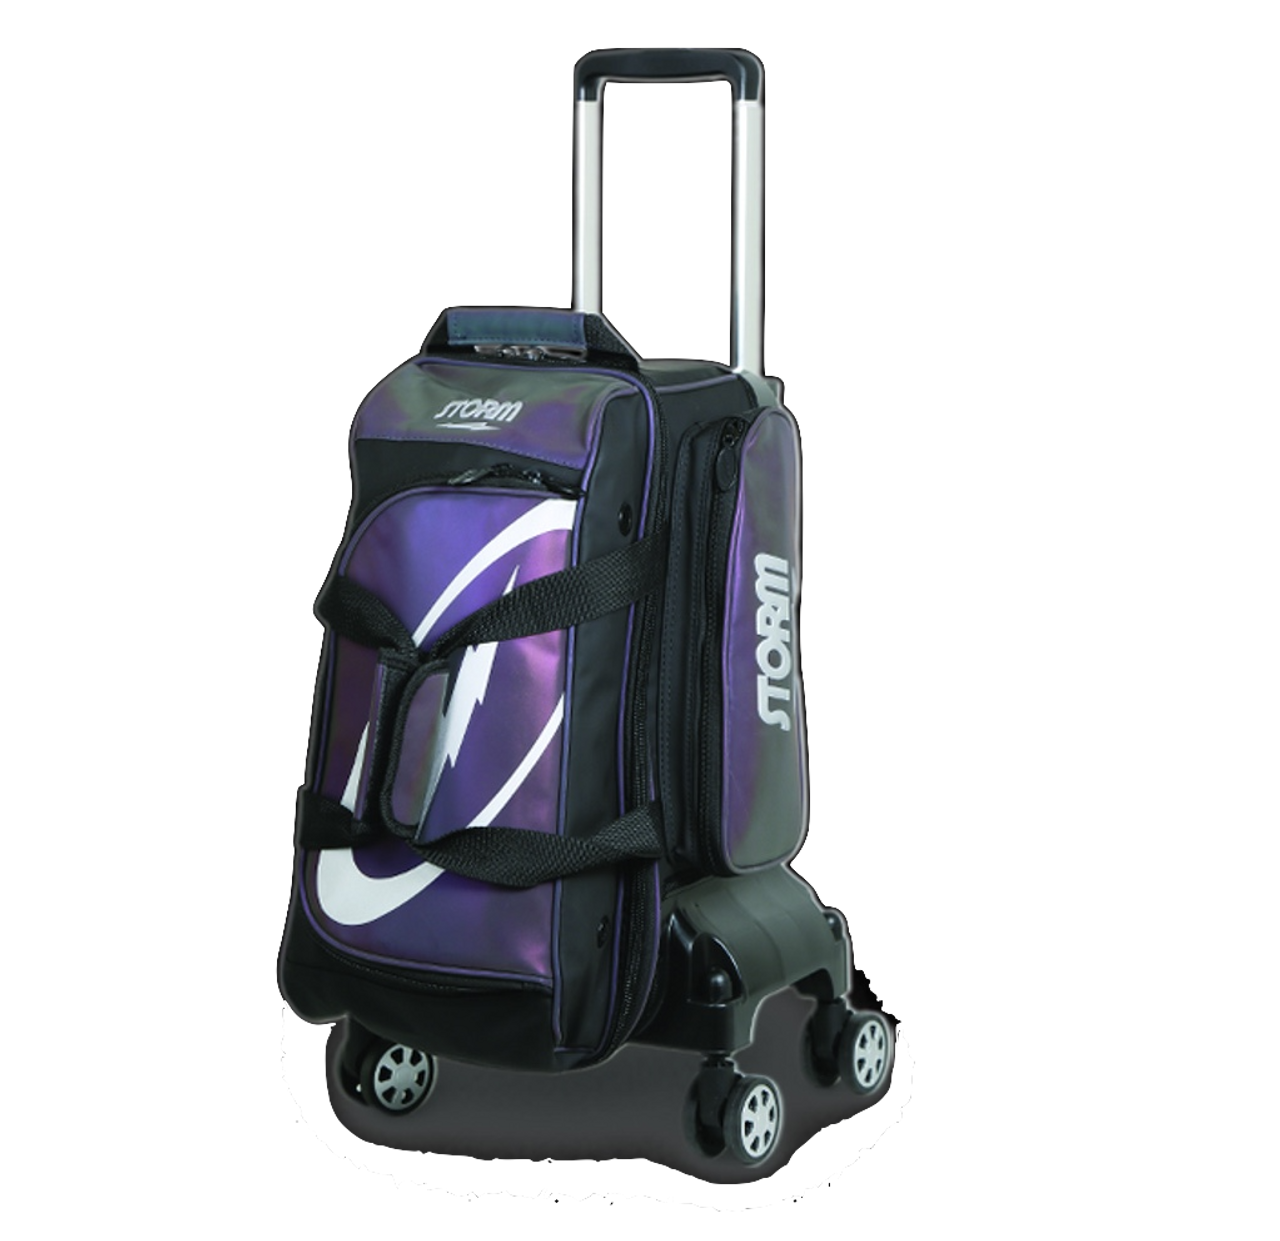 Storm Bowling Bags - The Bowler Depot - Buy Online Now